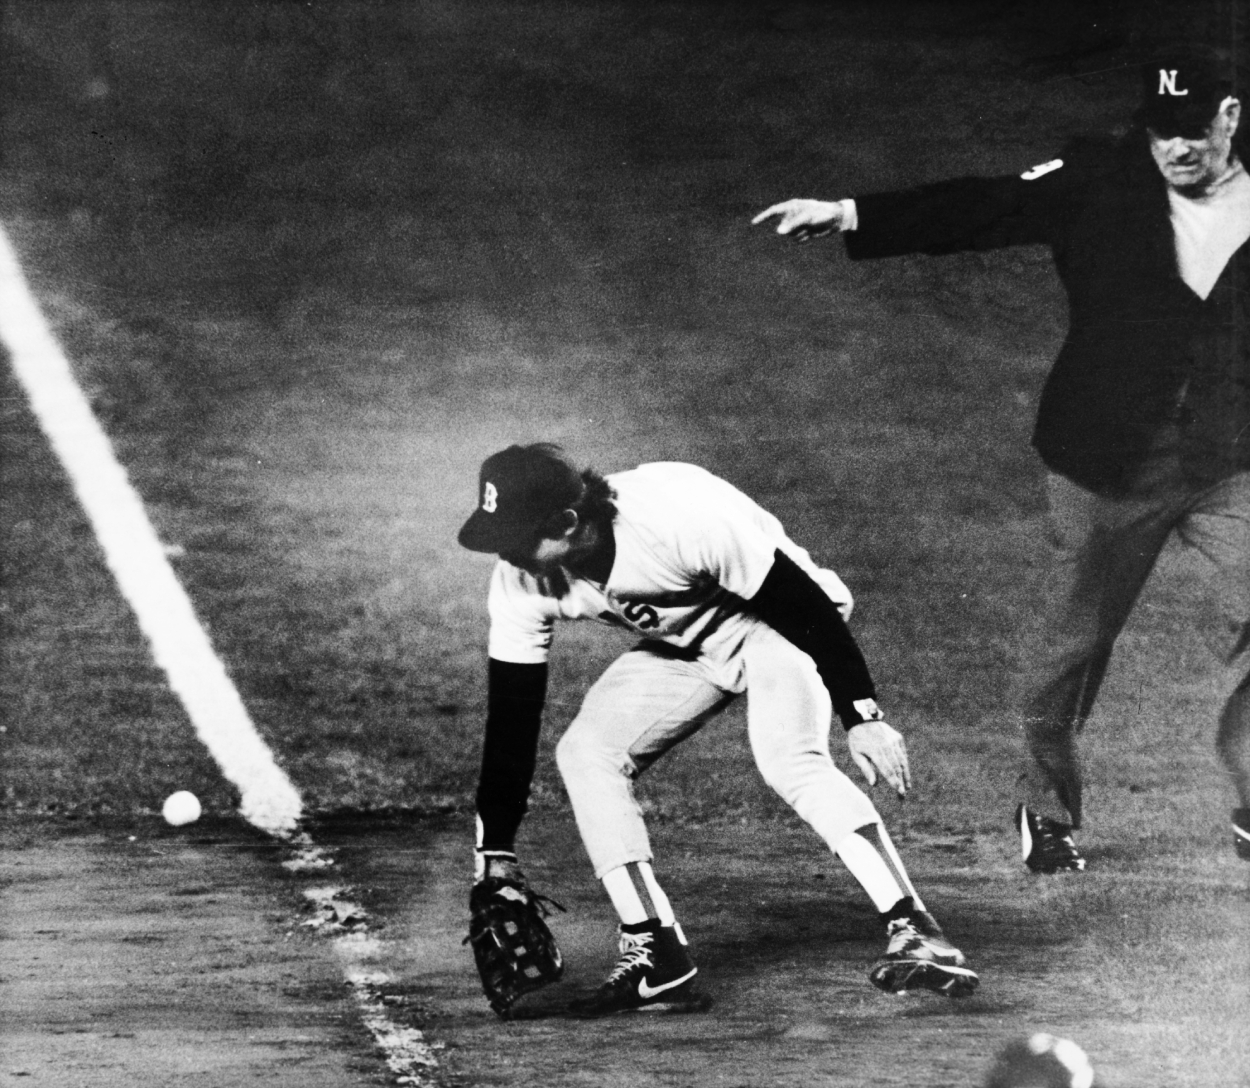 Bill Buckner of the Boston Red Sox makes an error at the bottom of the 10th inning in Game 6 of the 1986 World Series.